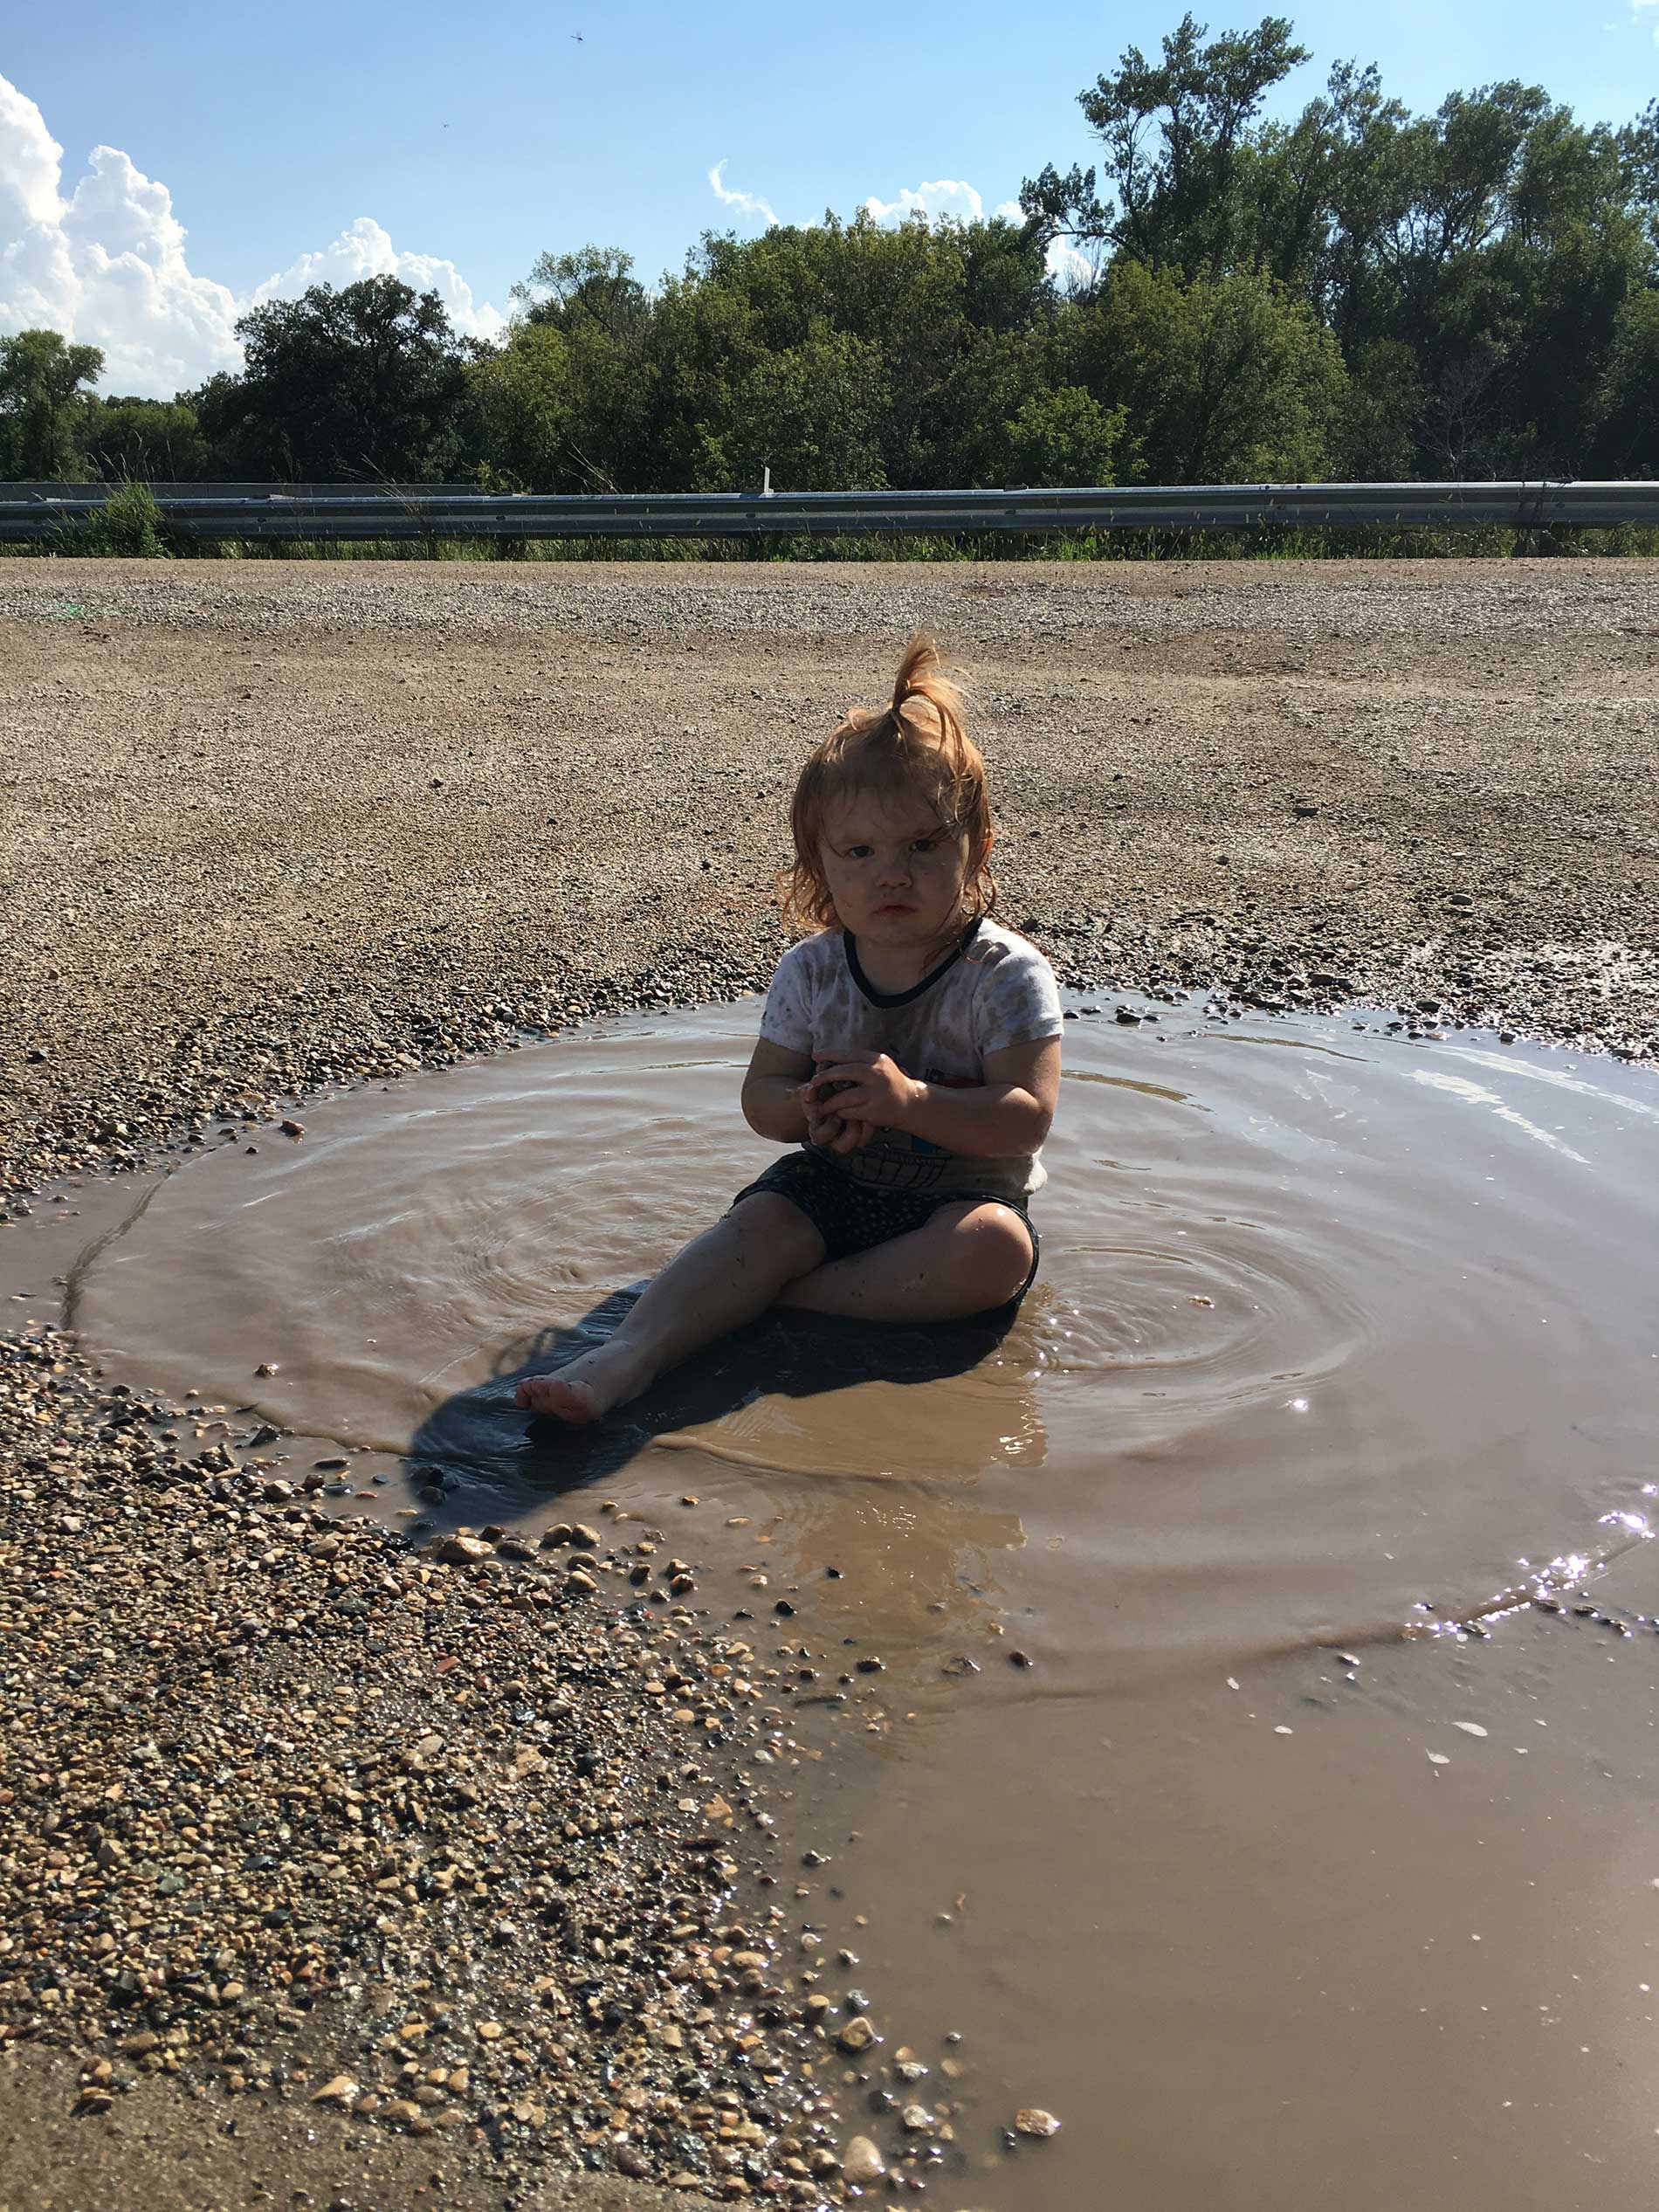 Brinley all defiant in the mud puddle